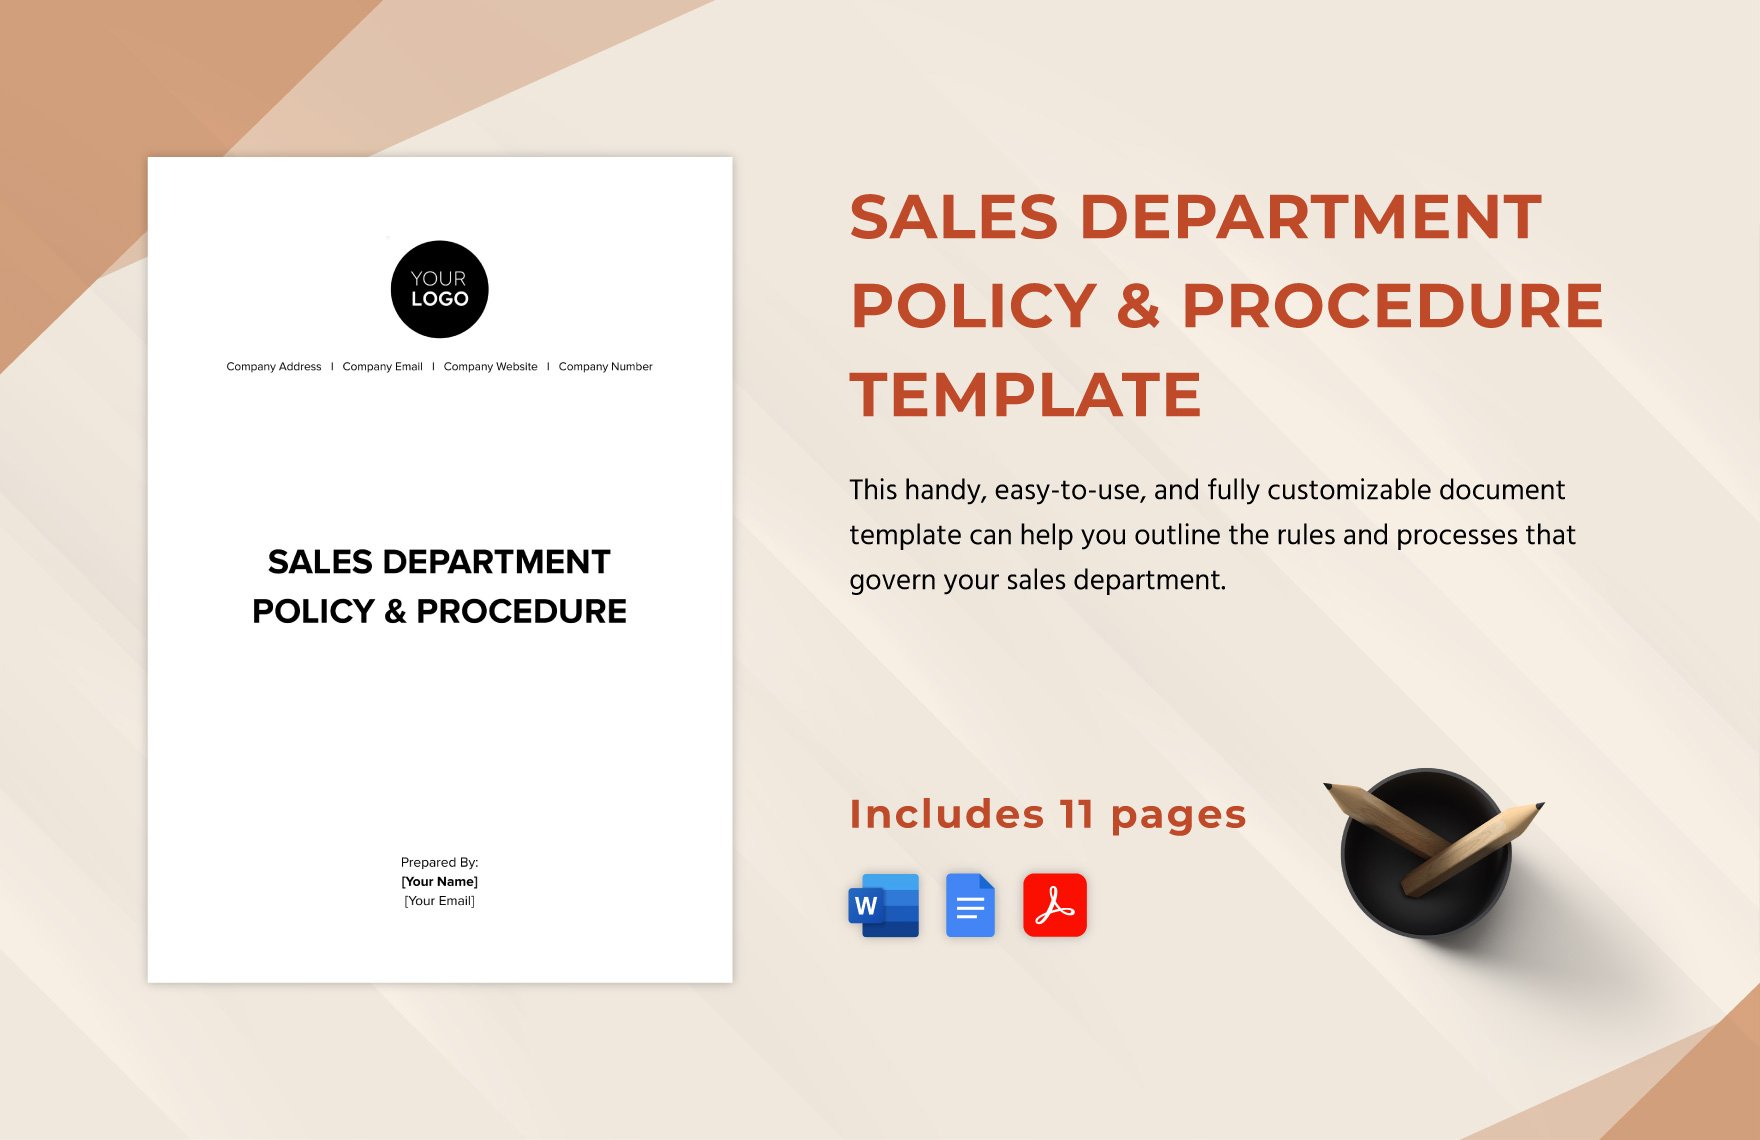 Sales Department Policy & Procedure Template